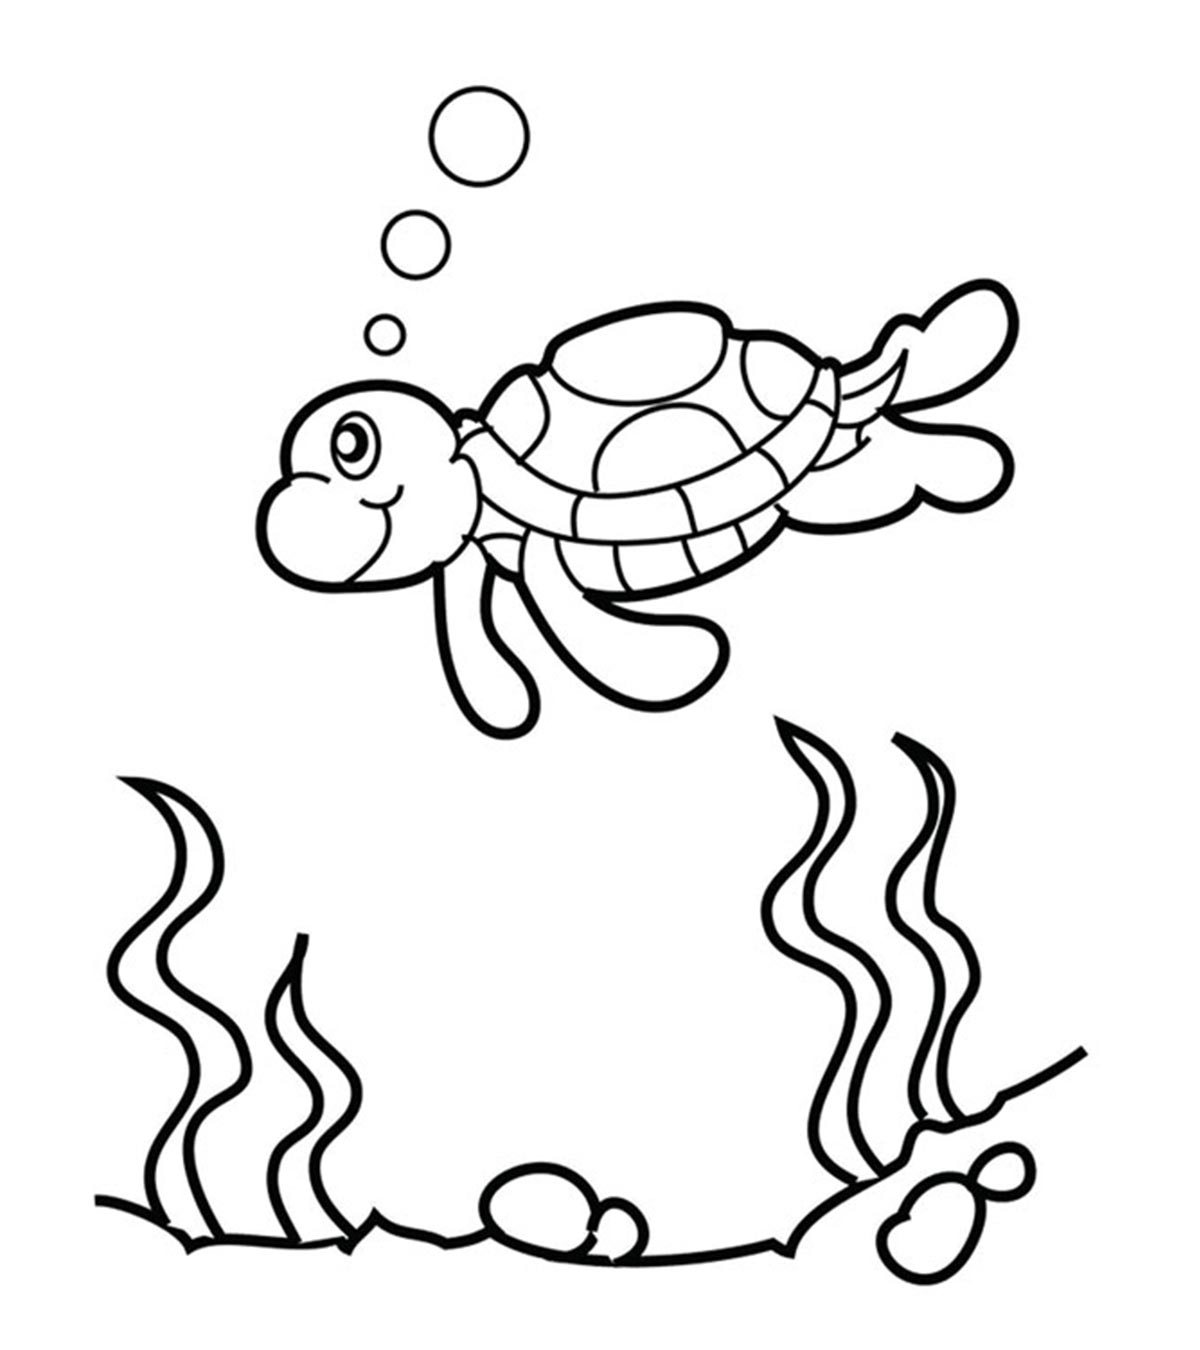 10 Cute Sea Turtle Coloring Pages Your Toddler Will Love To Color_image